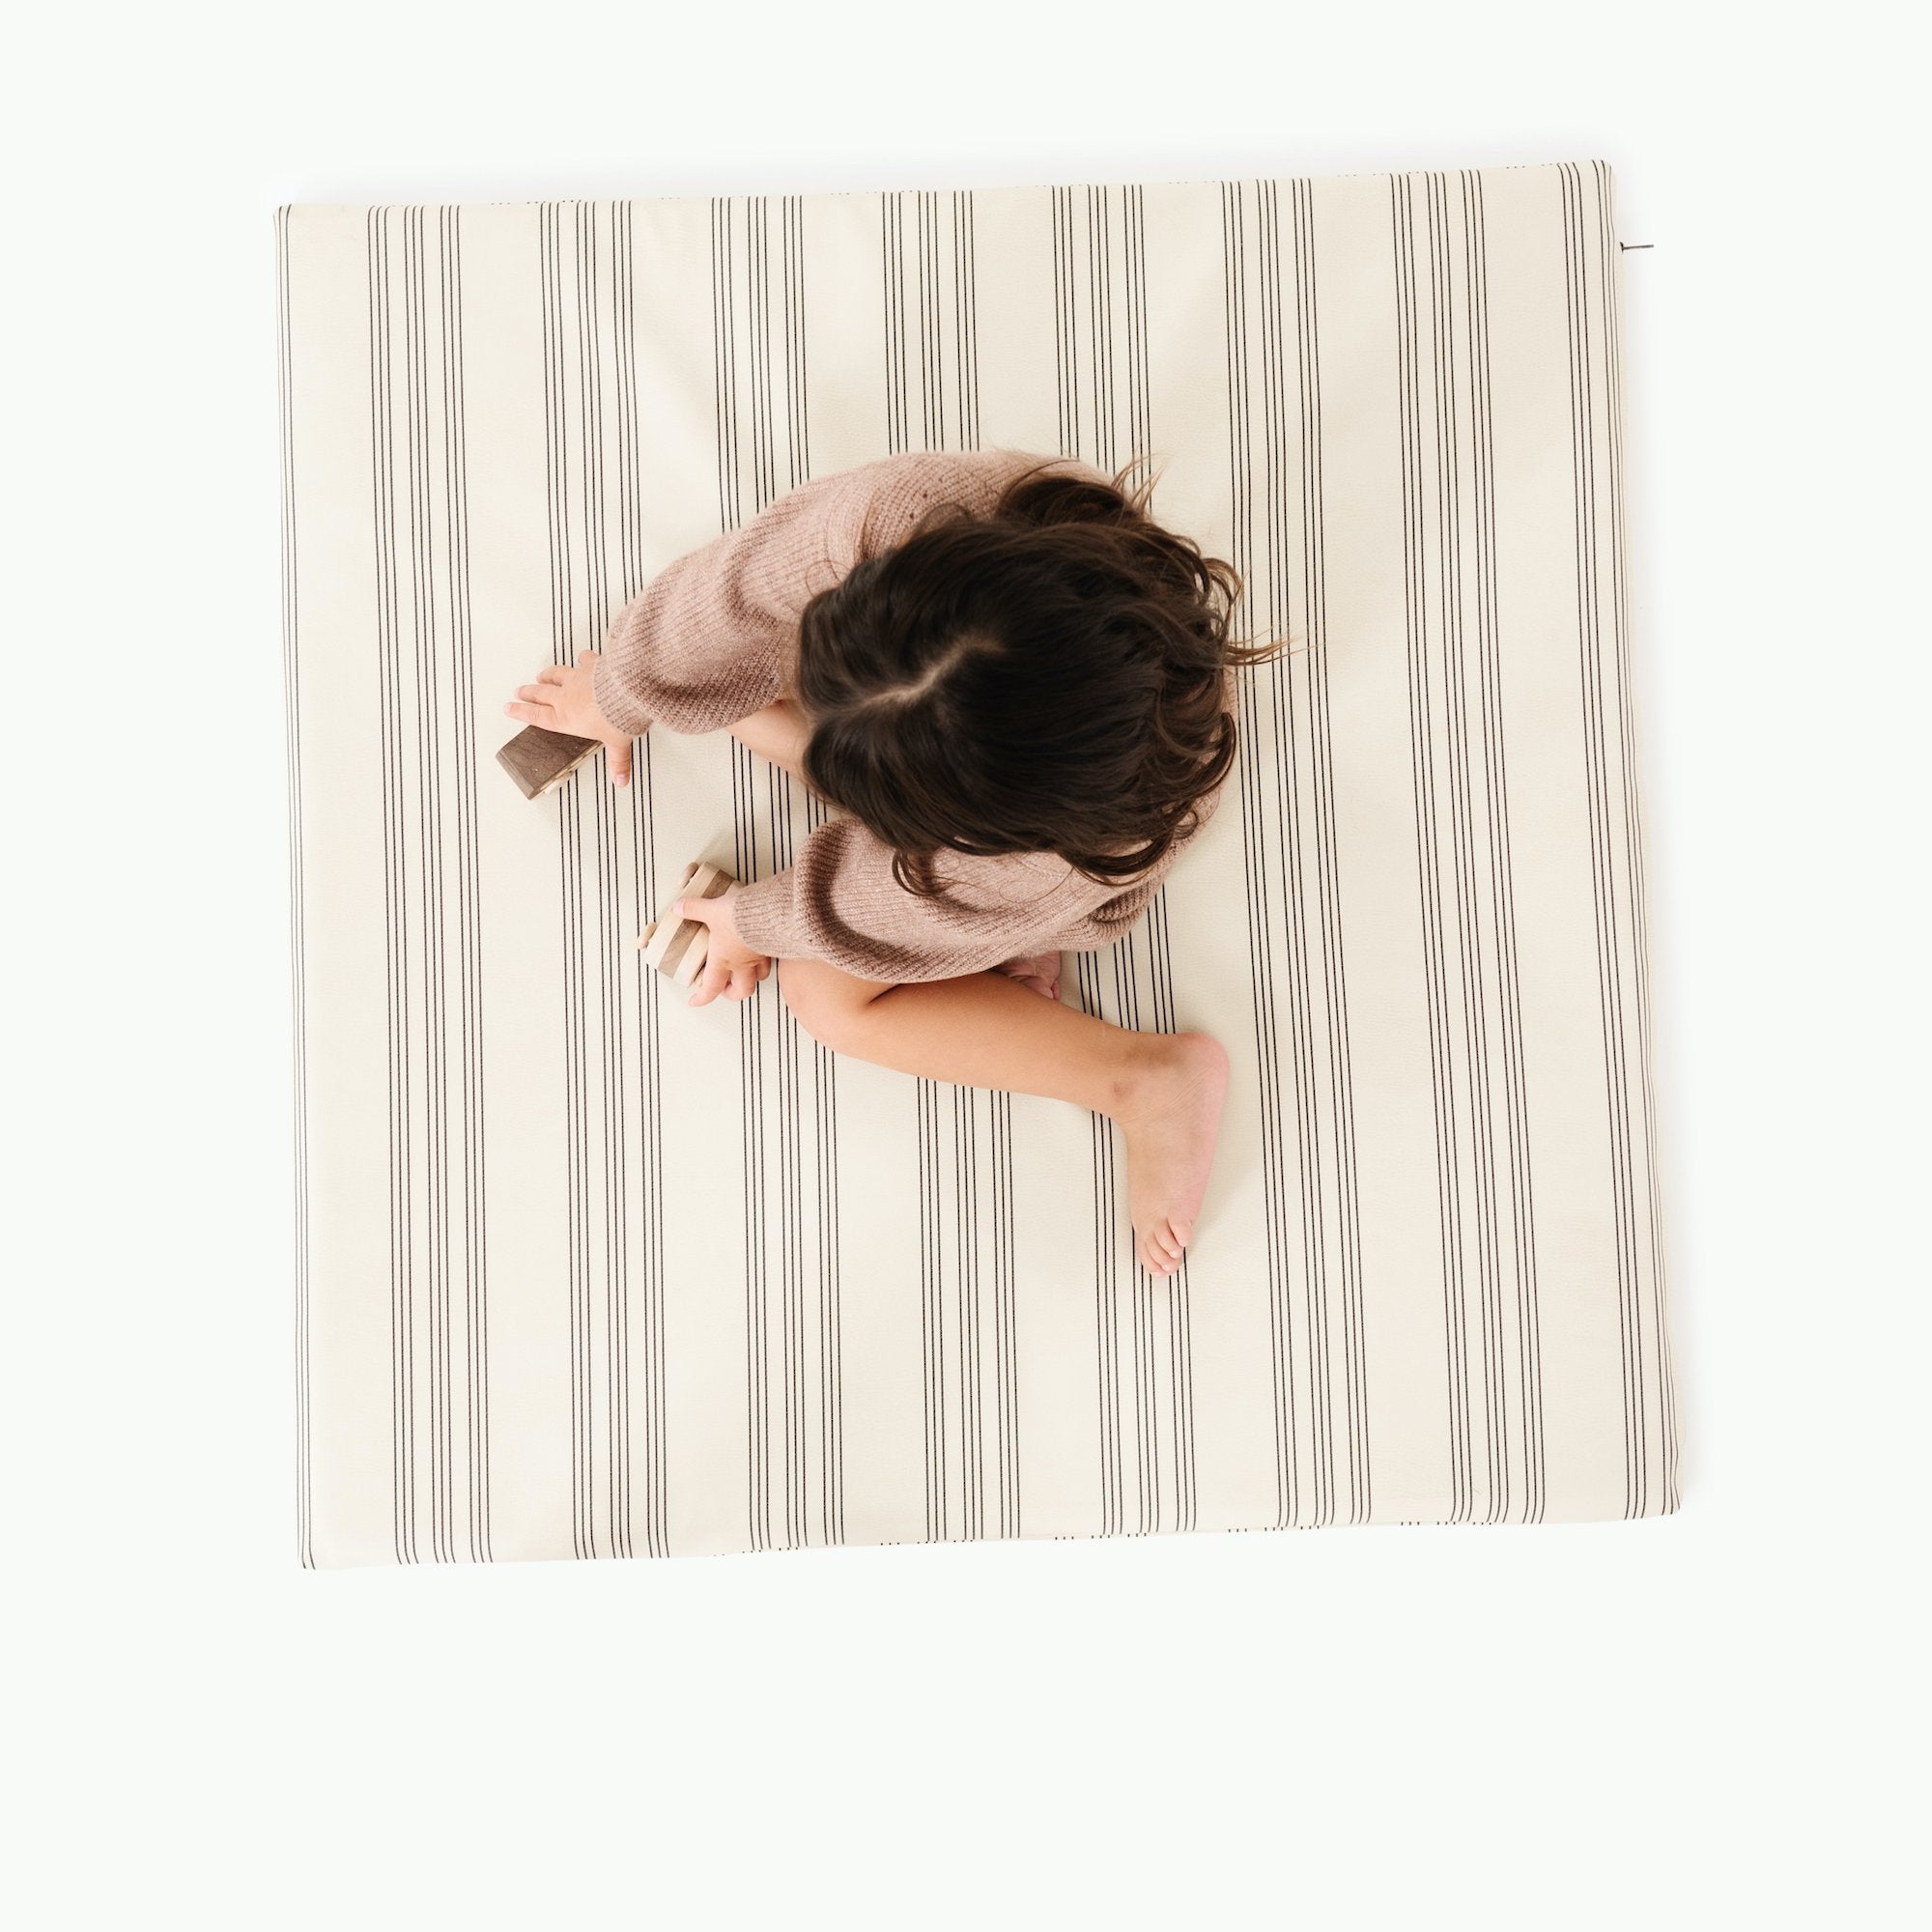 Pencil Stripe (on sale) / Square@overhead of girl playing on pencil stripe padded mini